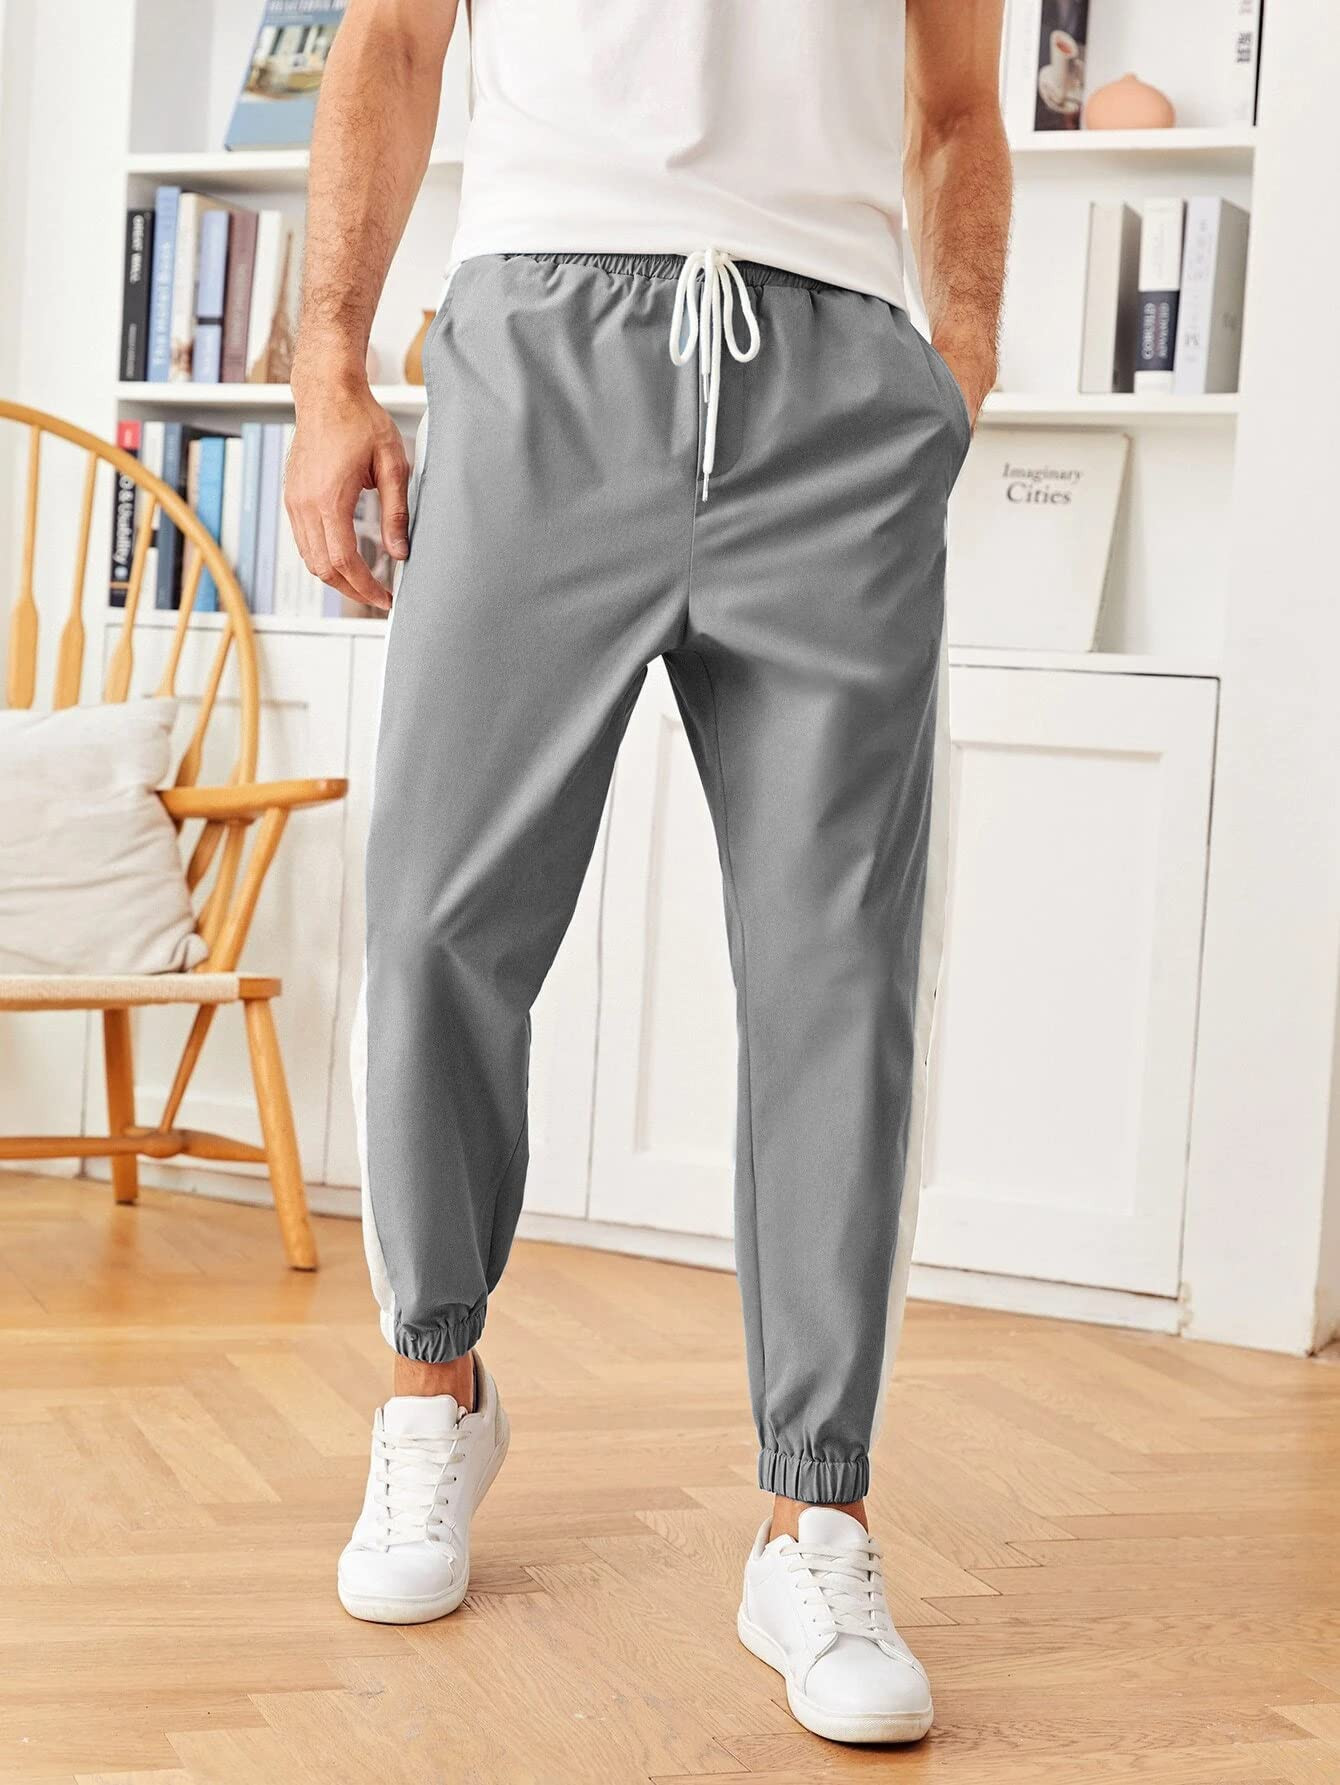 COUTEXYI Summer men´s casual striped pants fitness sports pants tight  jogging trousers - Walmart.com